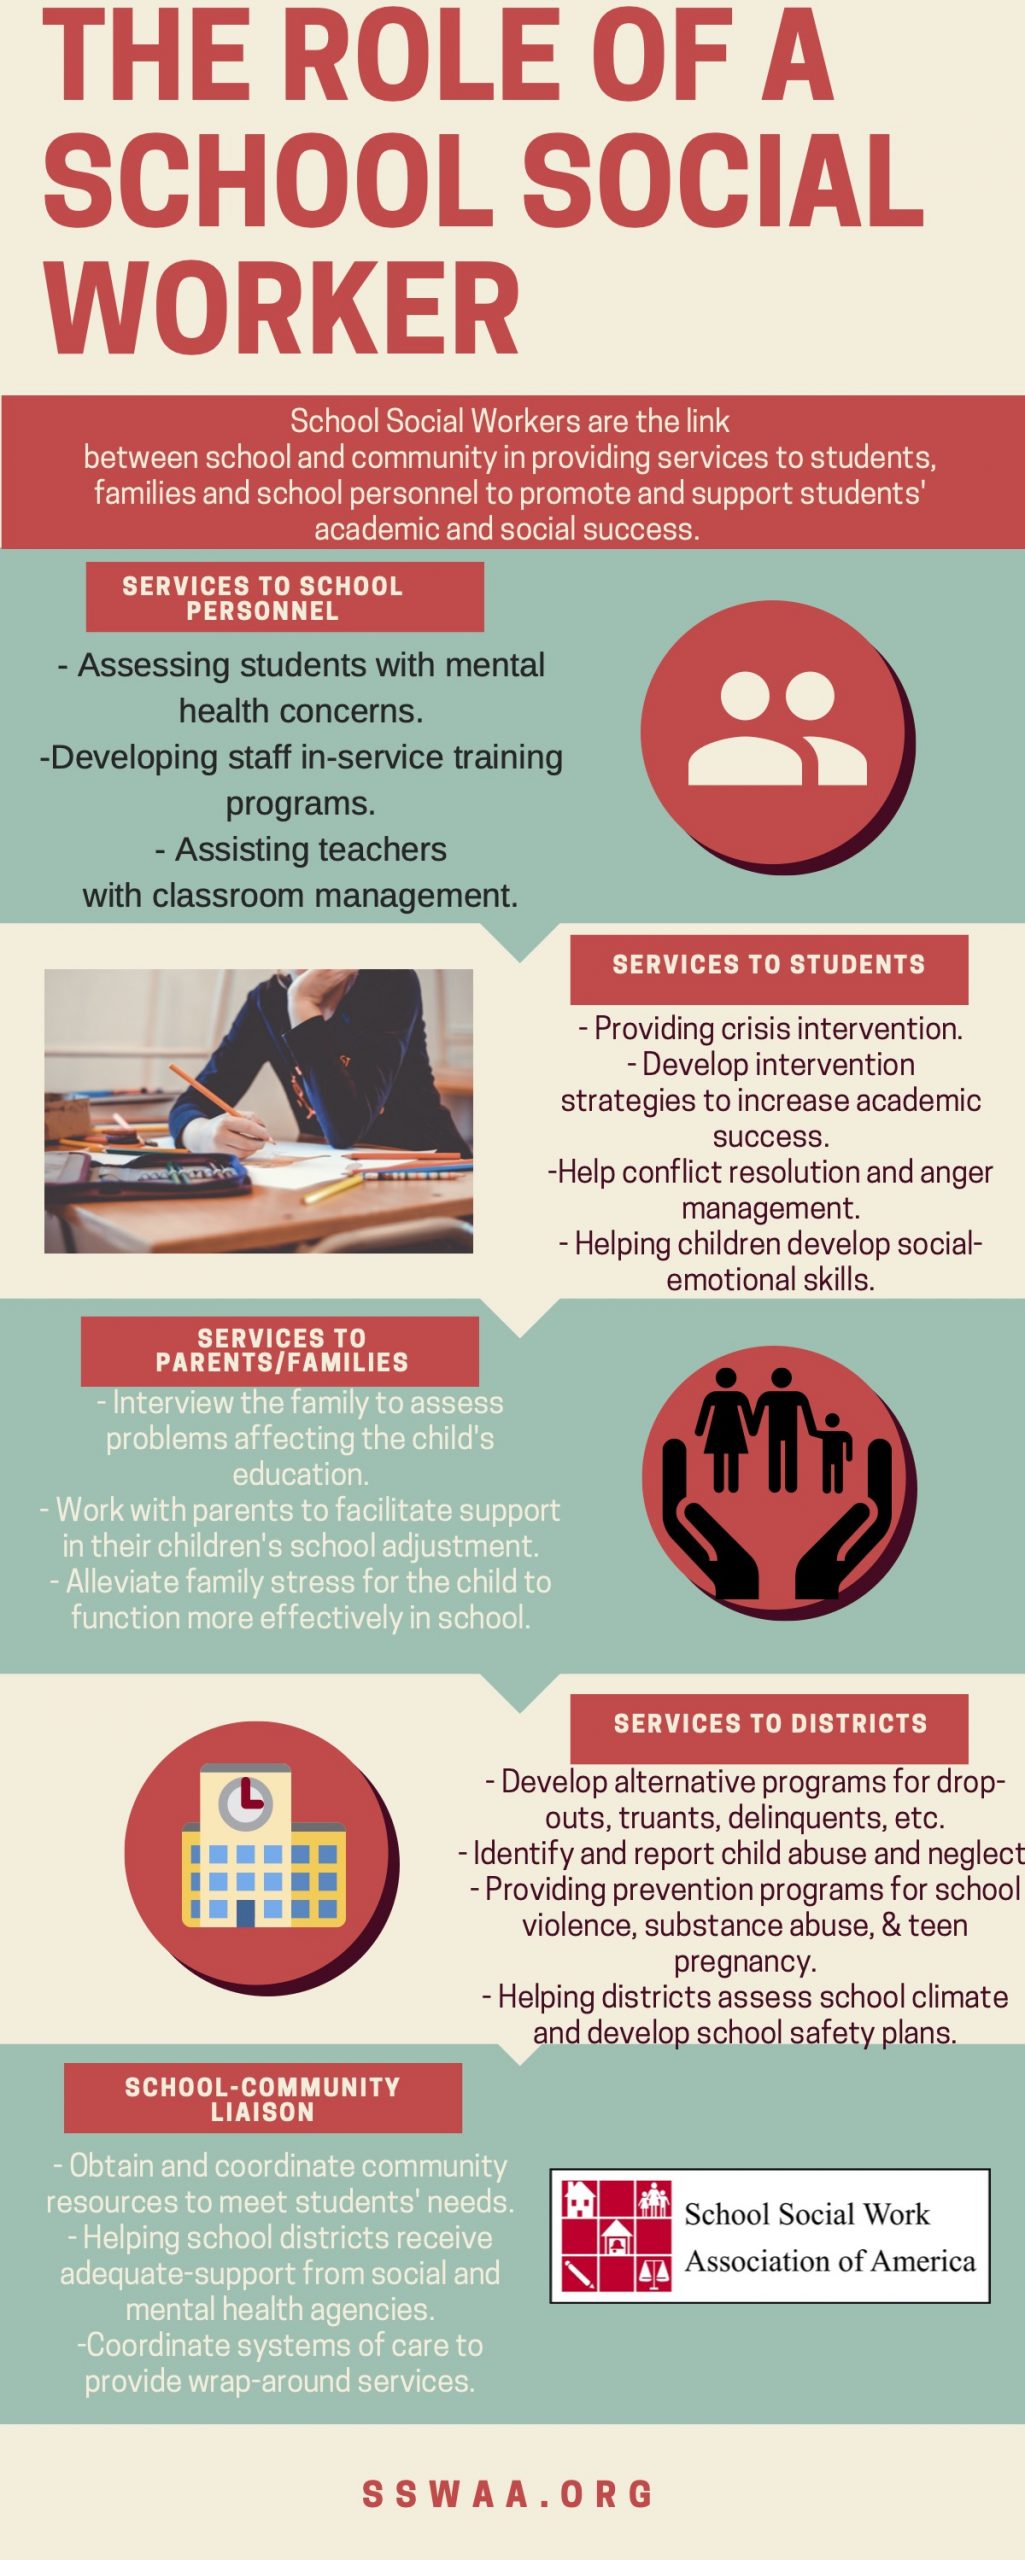 School social workers provide services to school personnel, students, parents/families, and districts.